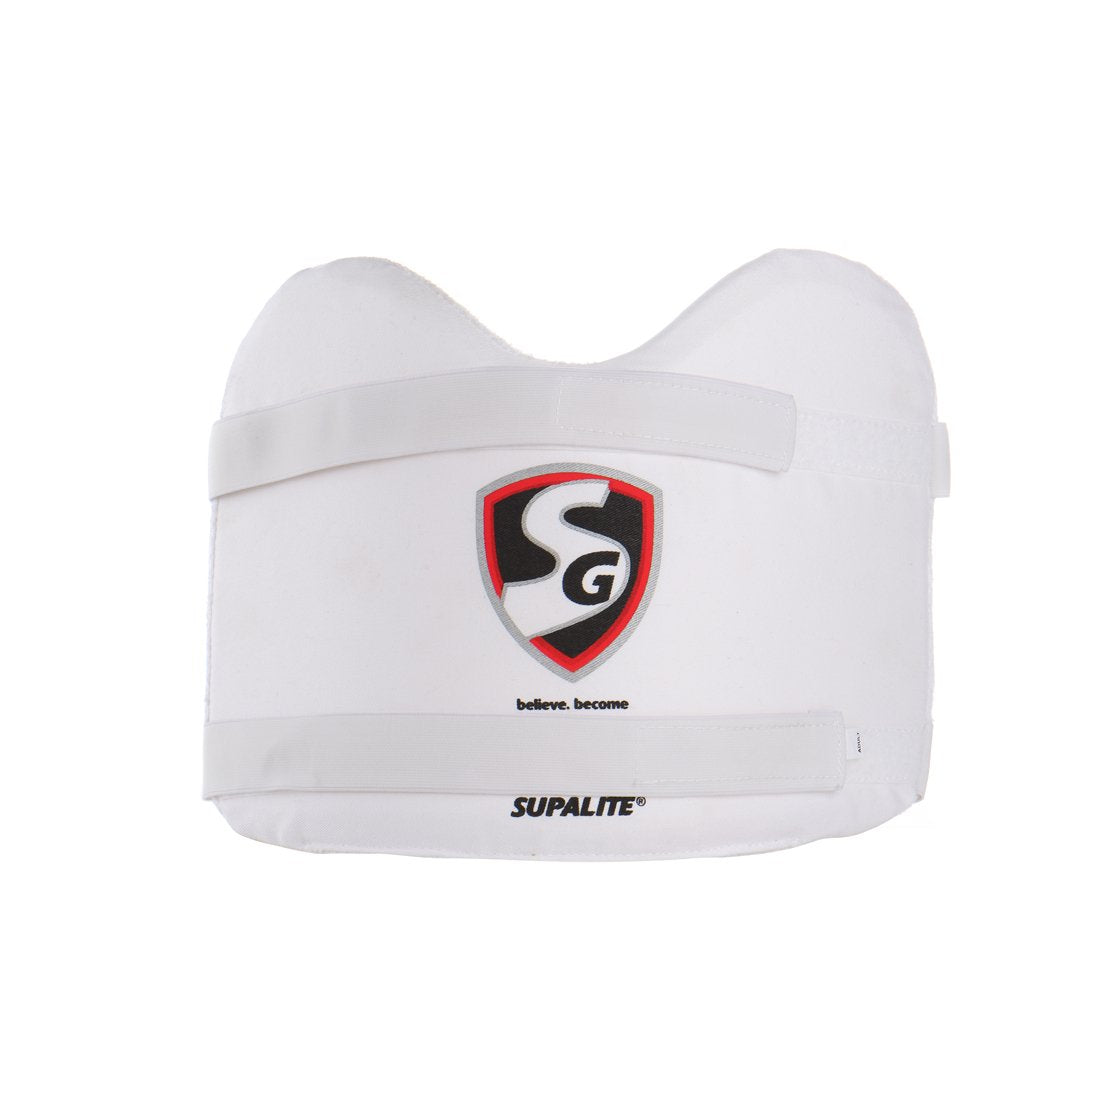 SG Supalite Adult Chest Guard